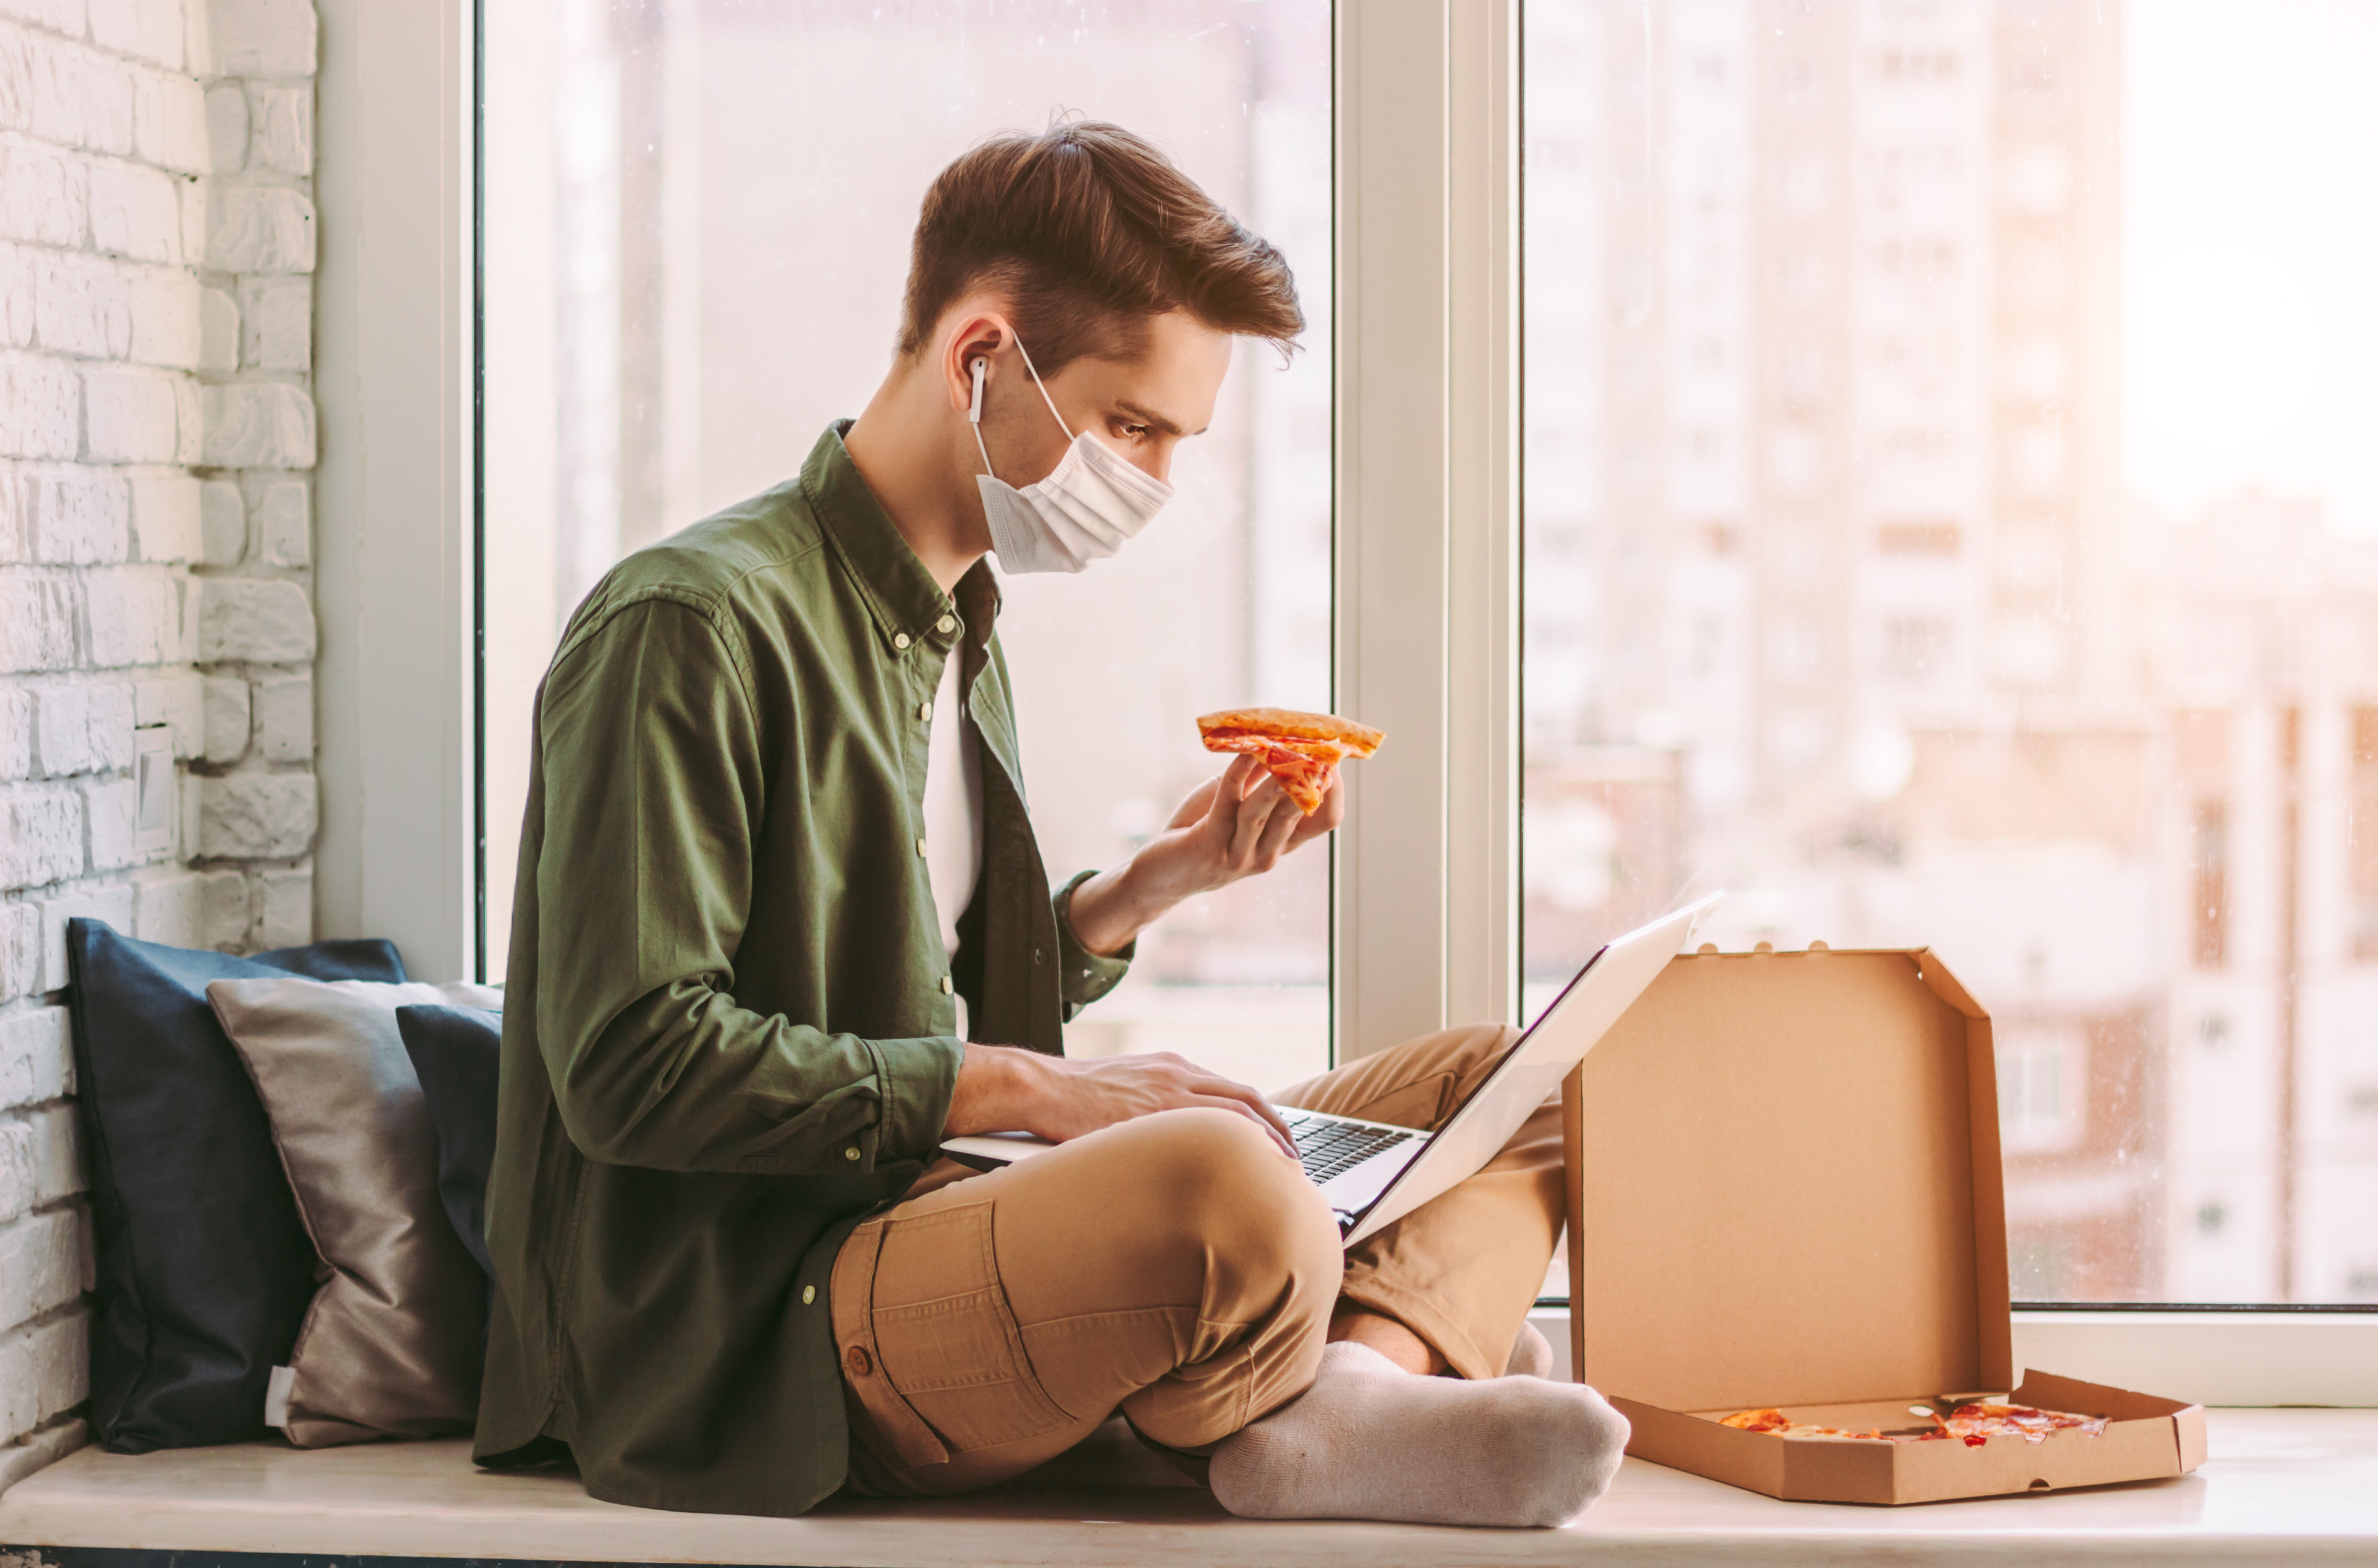 Around a third of workers with jobs that can be conducted remotely are working from home, the Pew Research Centre said in a survey released in March. Photo: Shutterstock